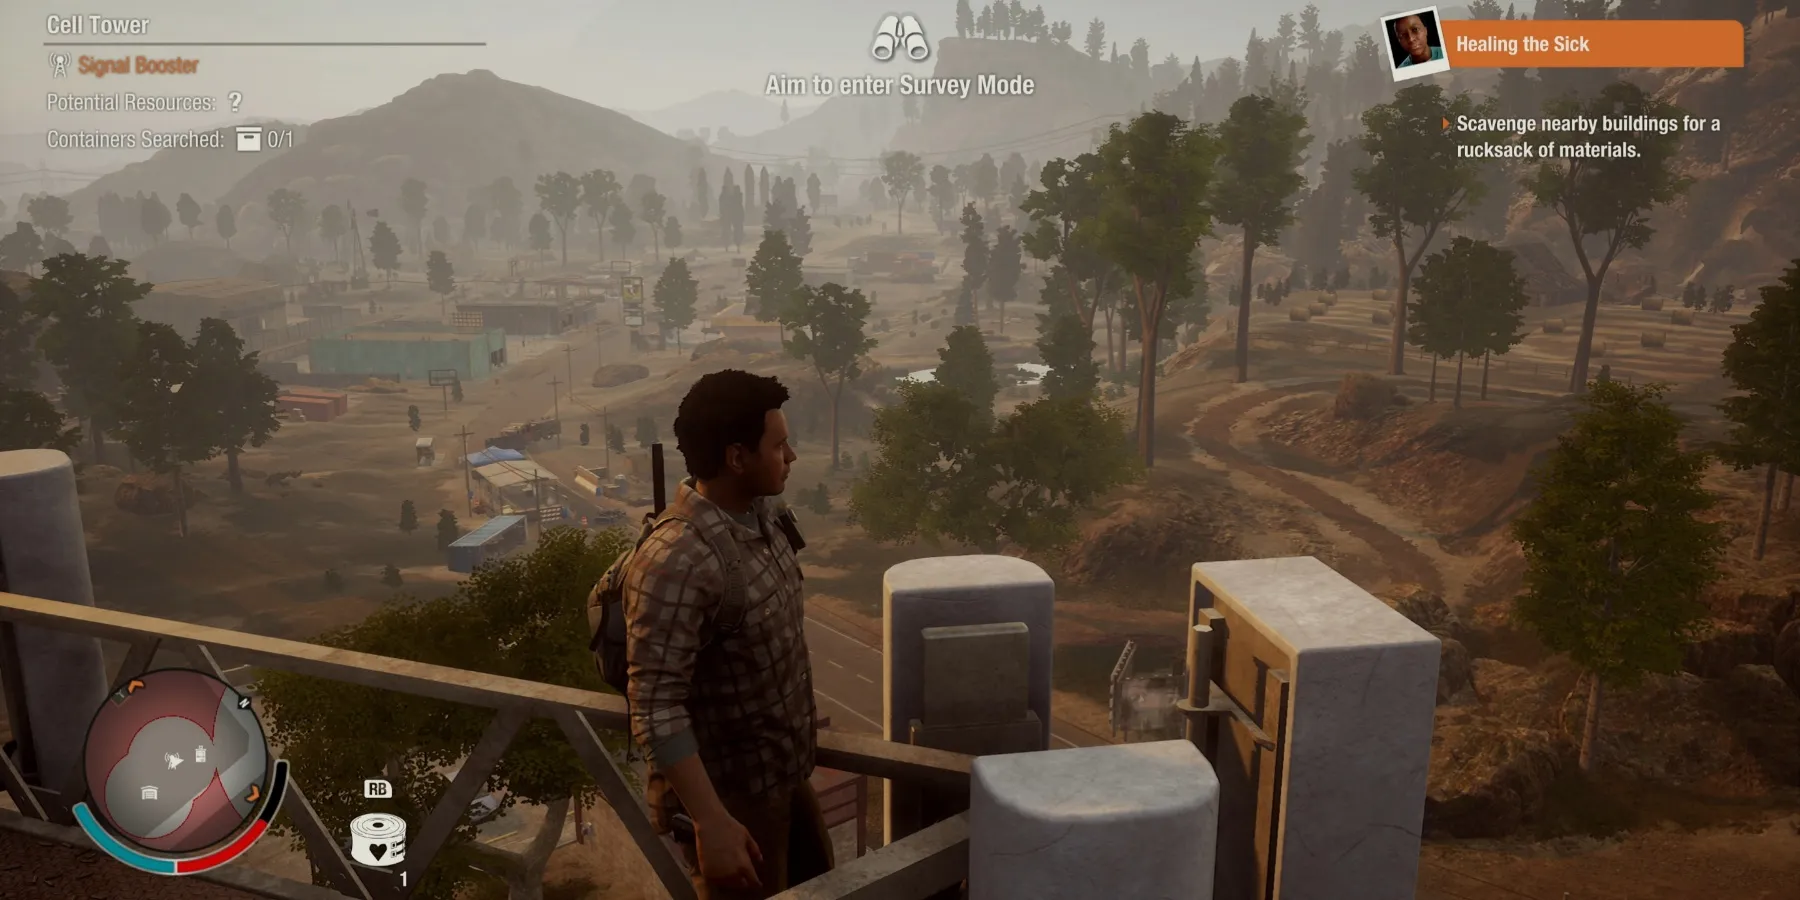 The player standing on a high metal structure looking out into nature